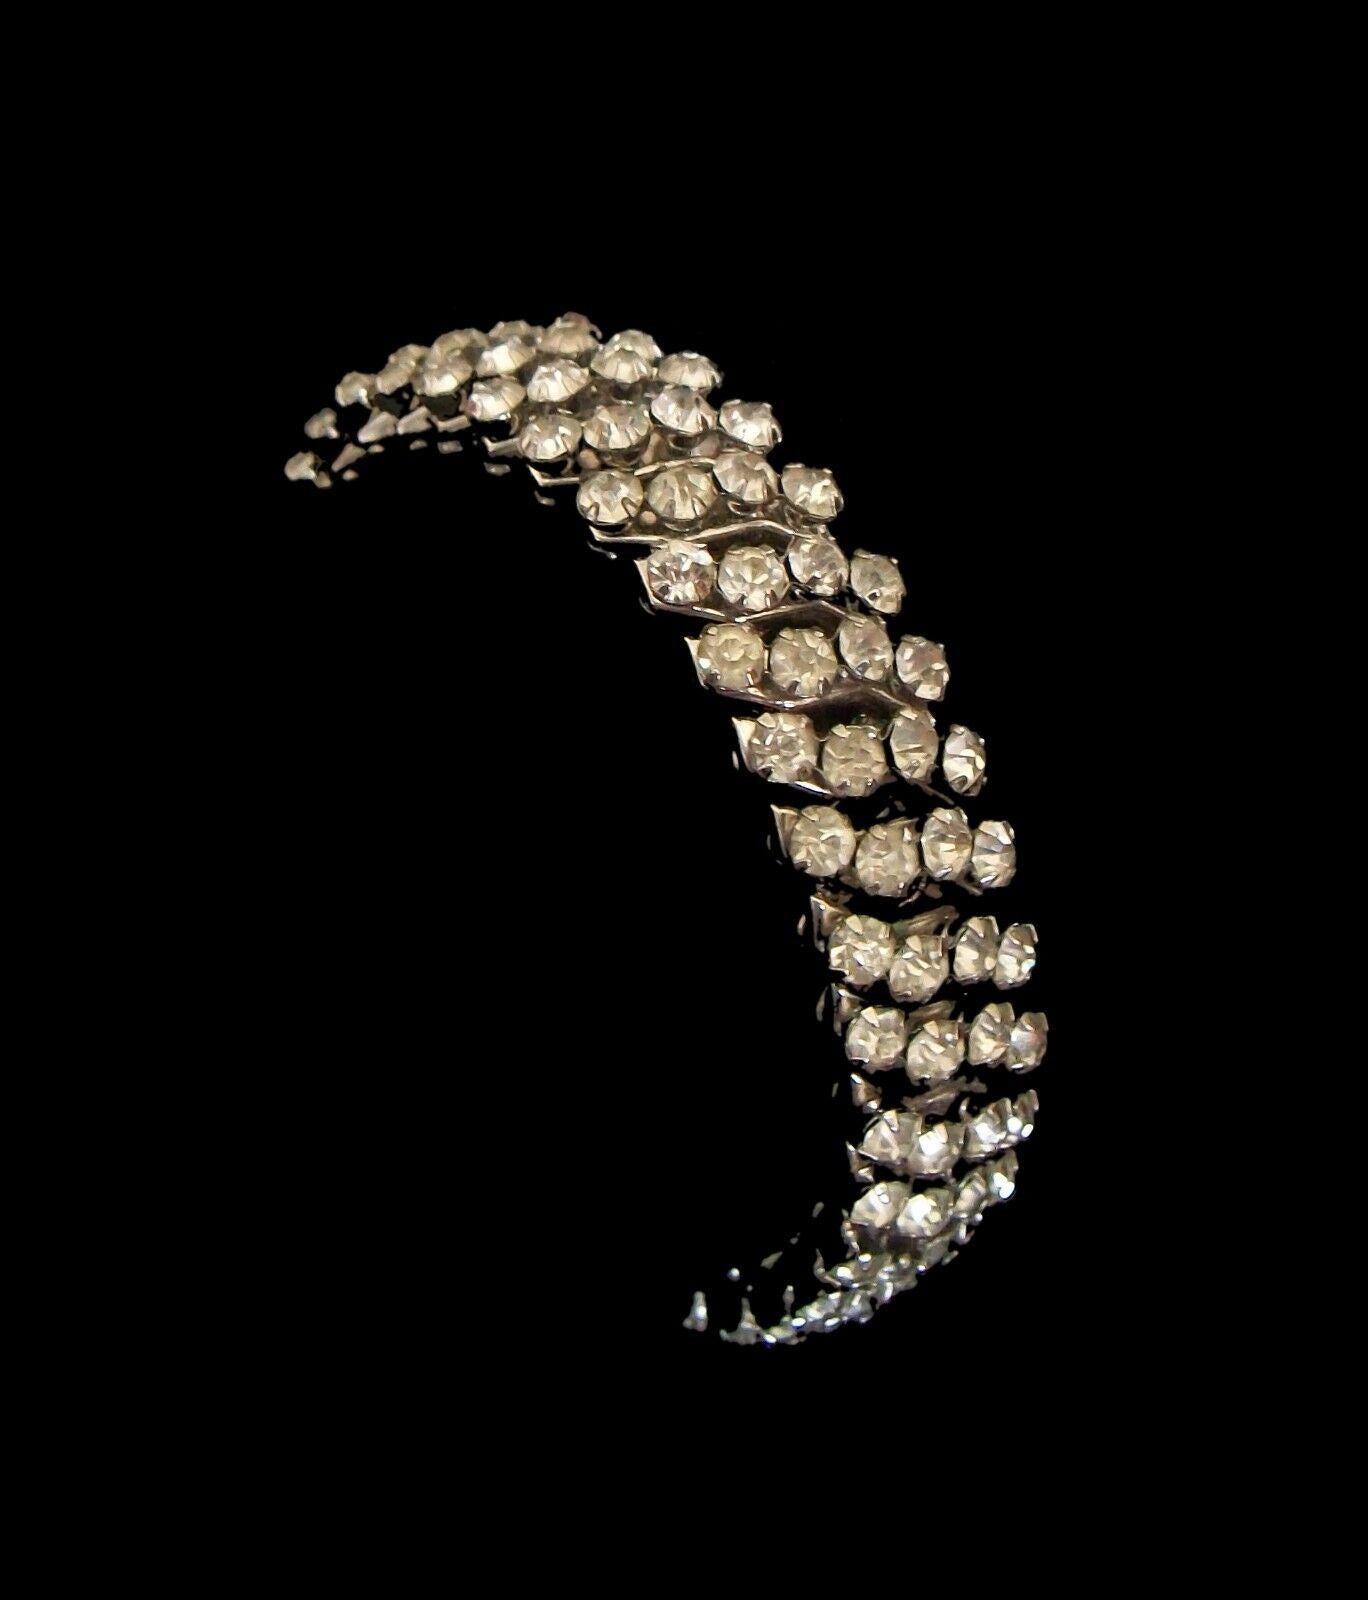 Vintage rhinestone flex bracelet - fine quality - four rows of round cut stones - unsigned - mid 20th century.

Excellent vintage condition - no loss - no damage - no repairs - minor signs of age and use - ready to wear.

Size/Dimensions - 5/8